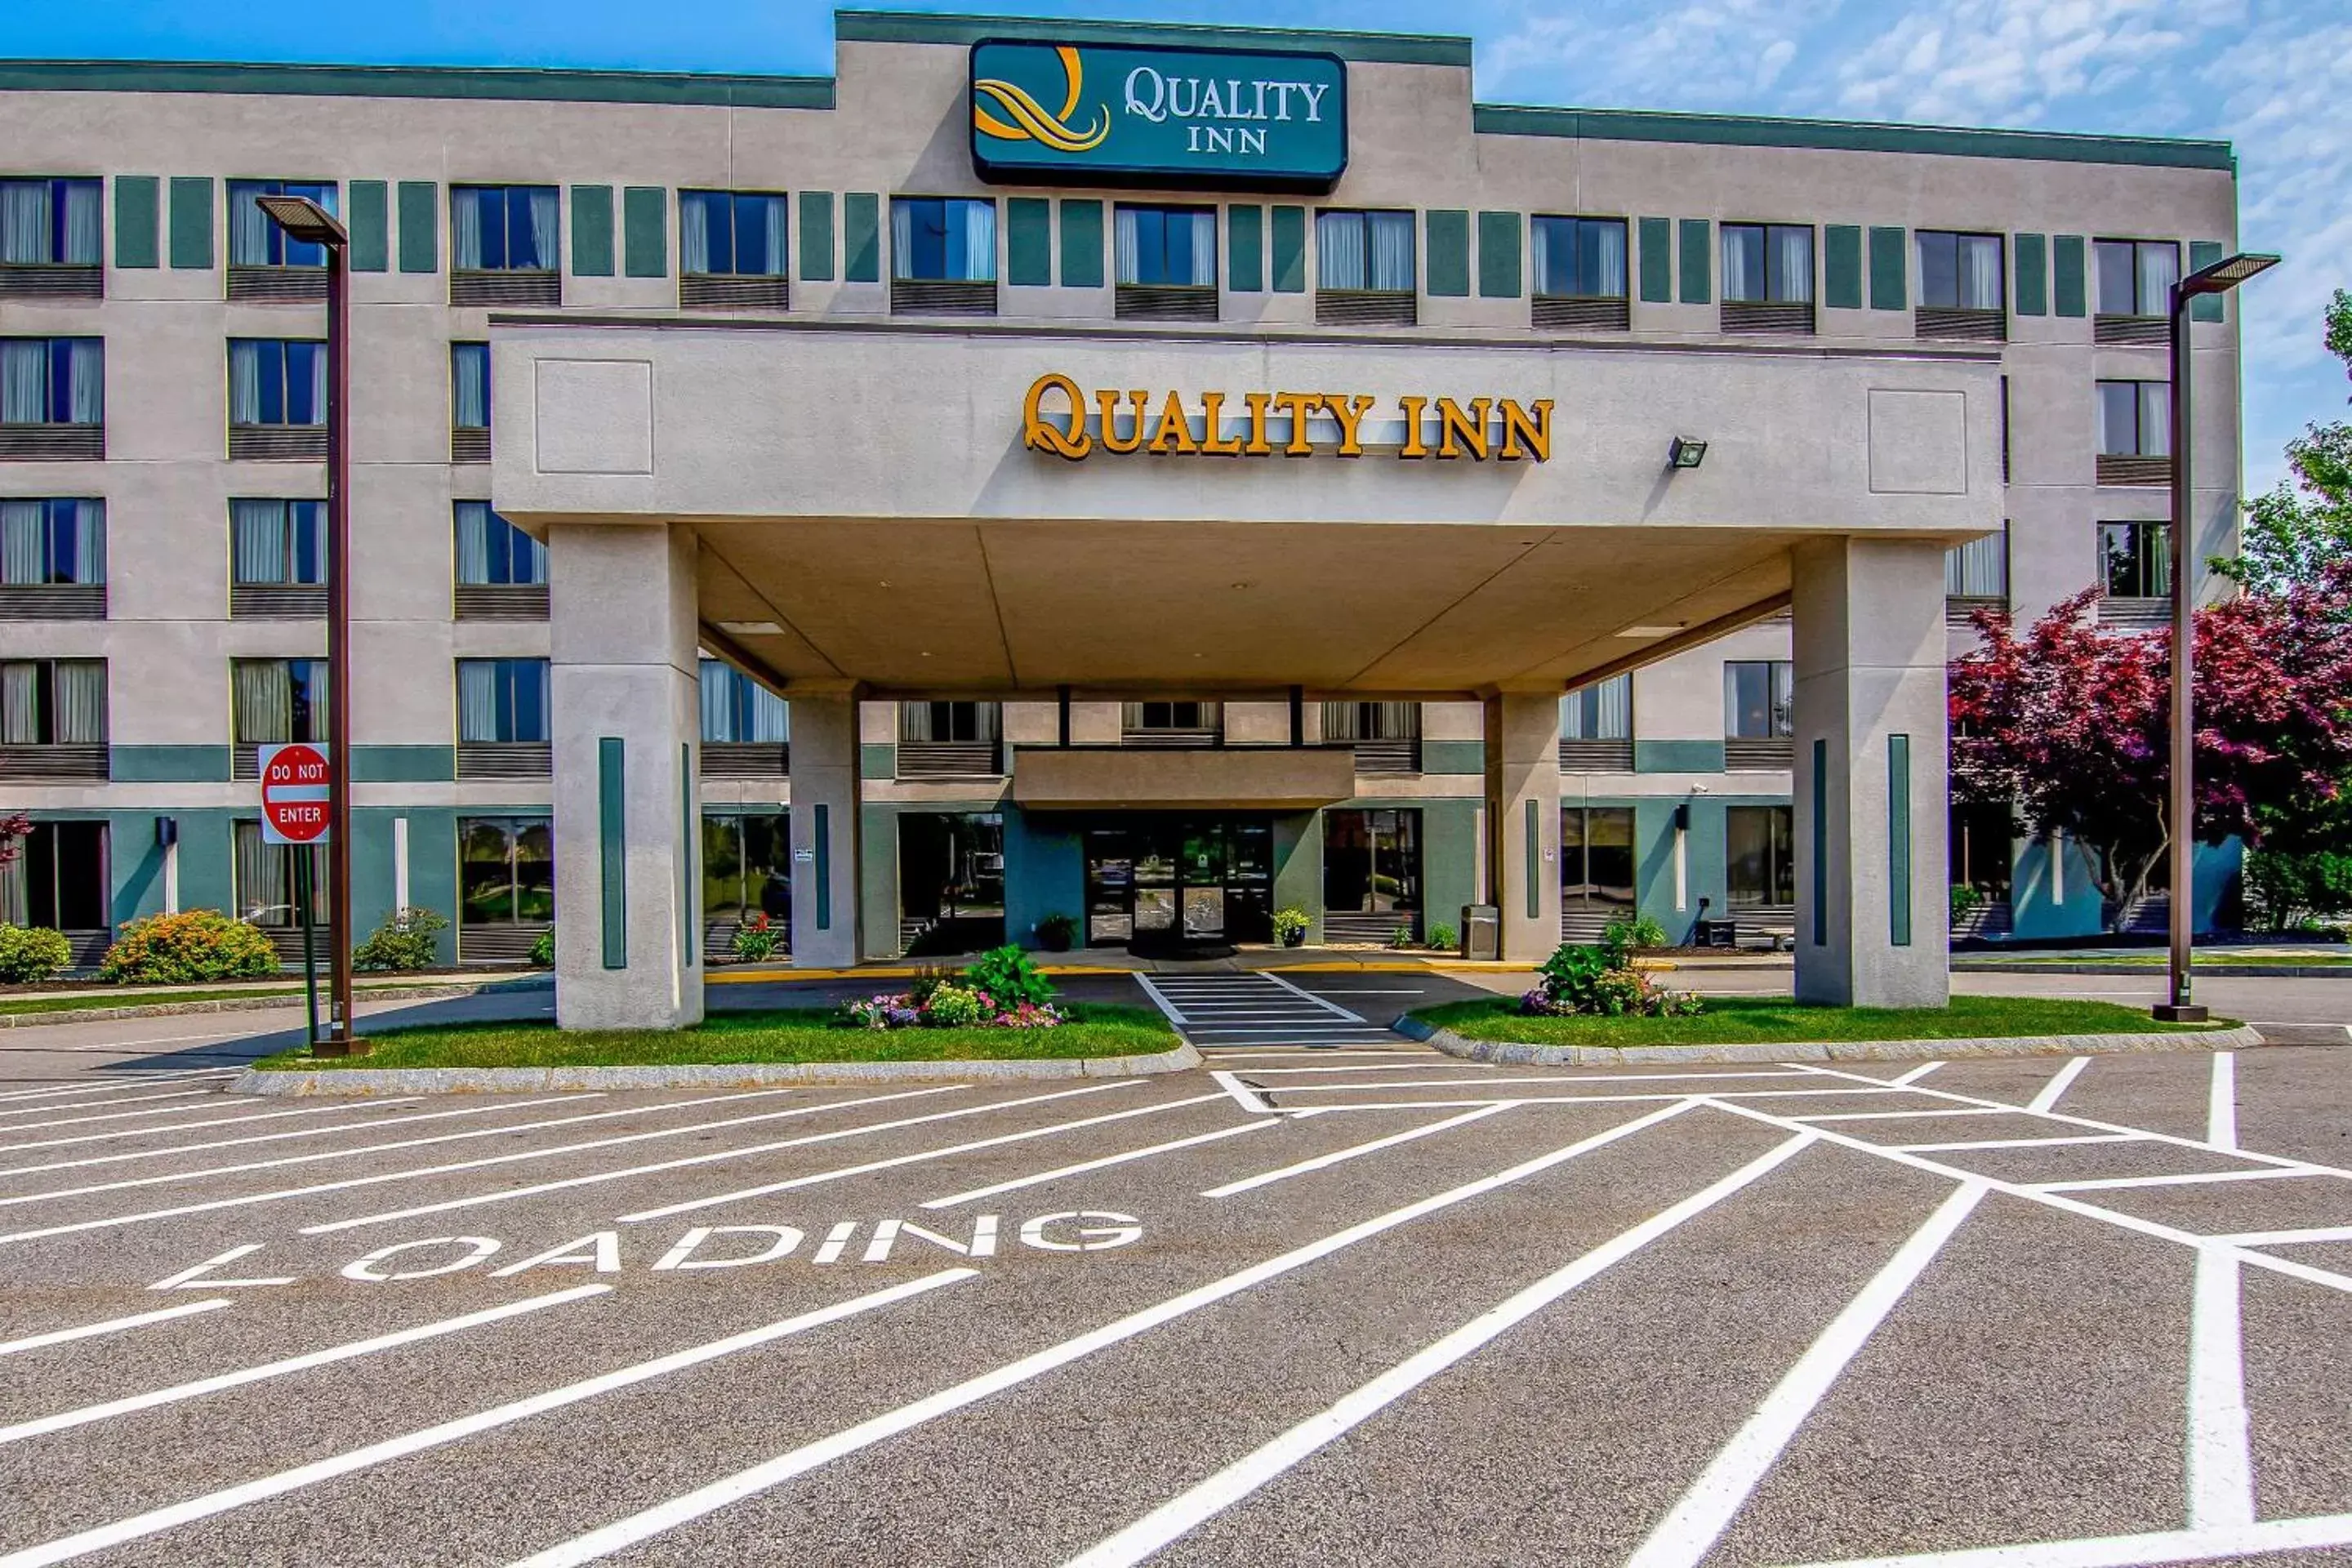 Property building in Quality Inn Portsmouth